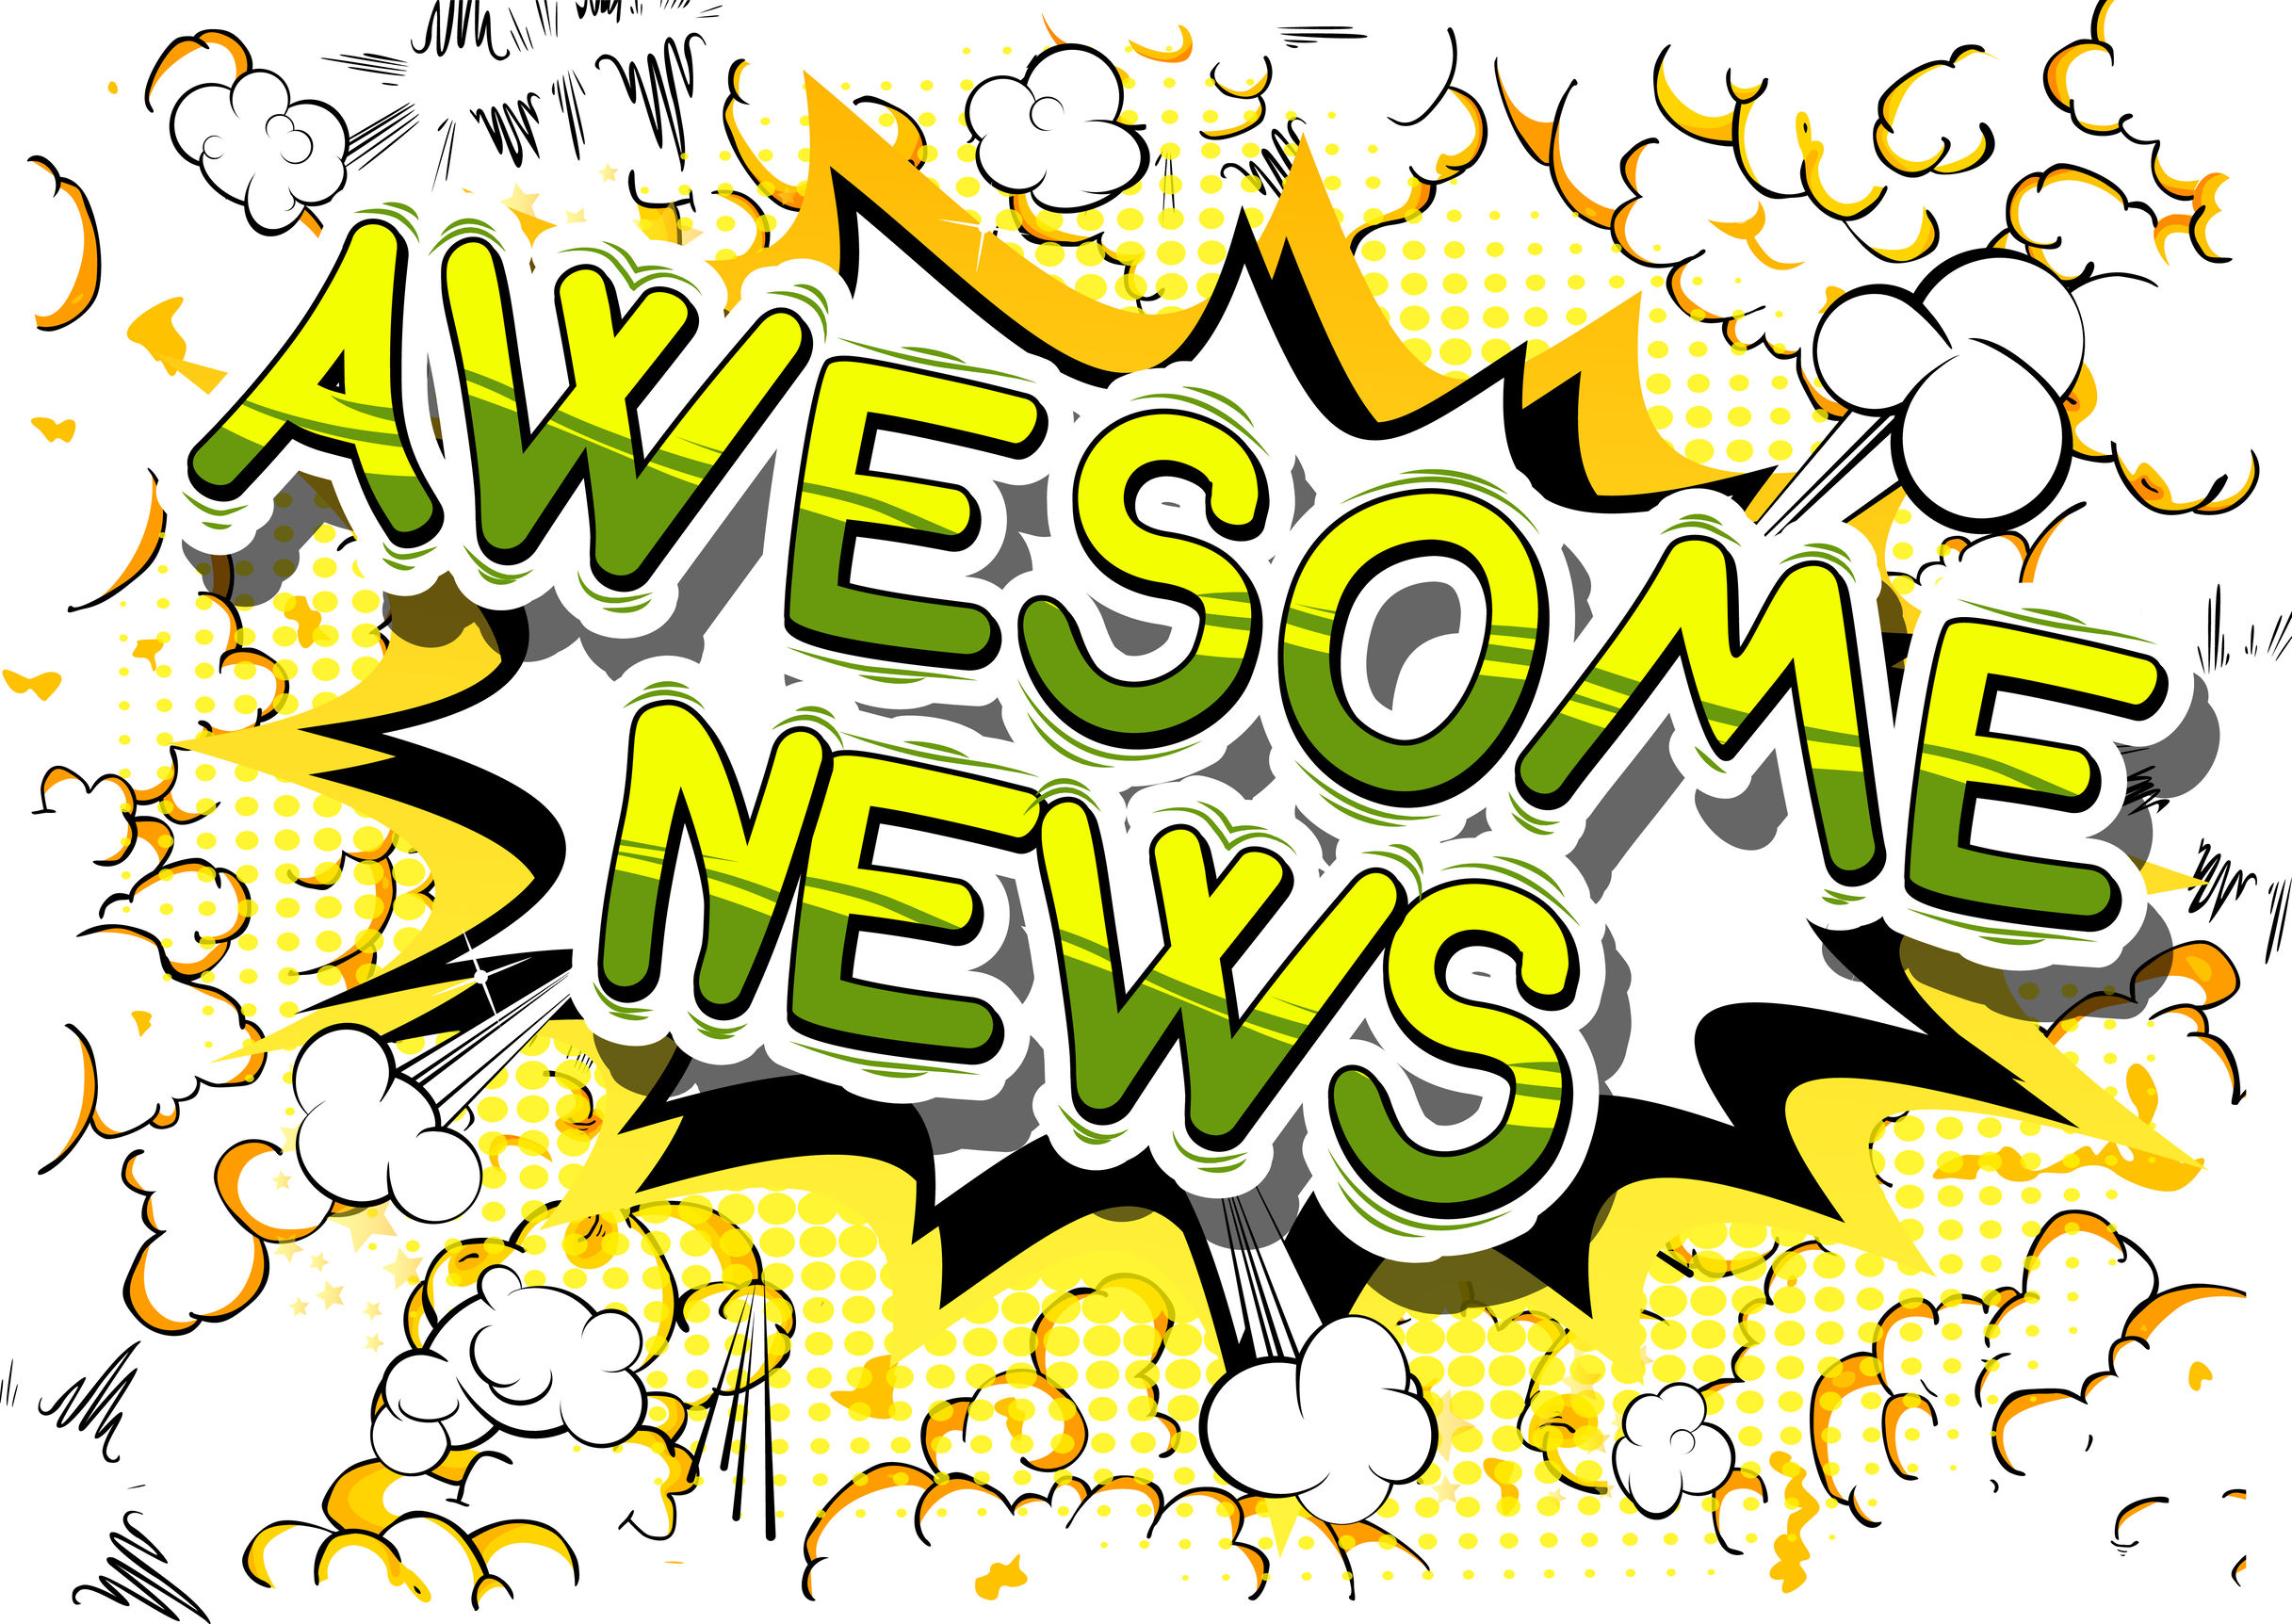 Awesome News - Comic book style phrase on abstract background.